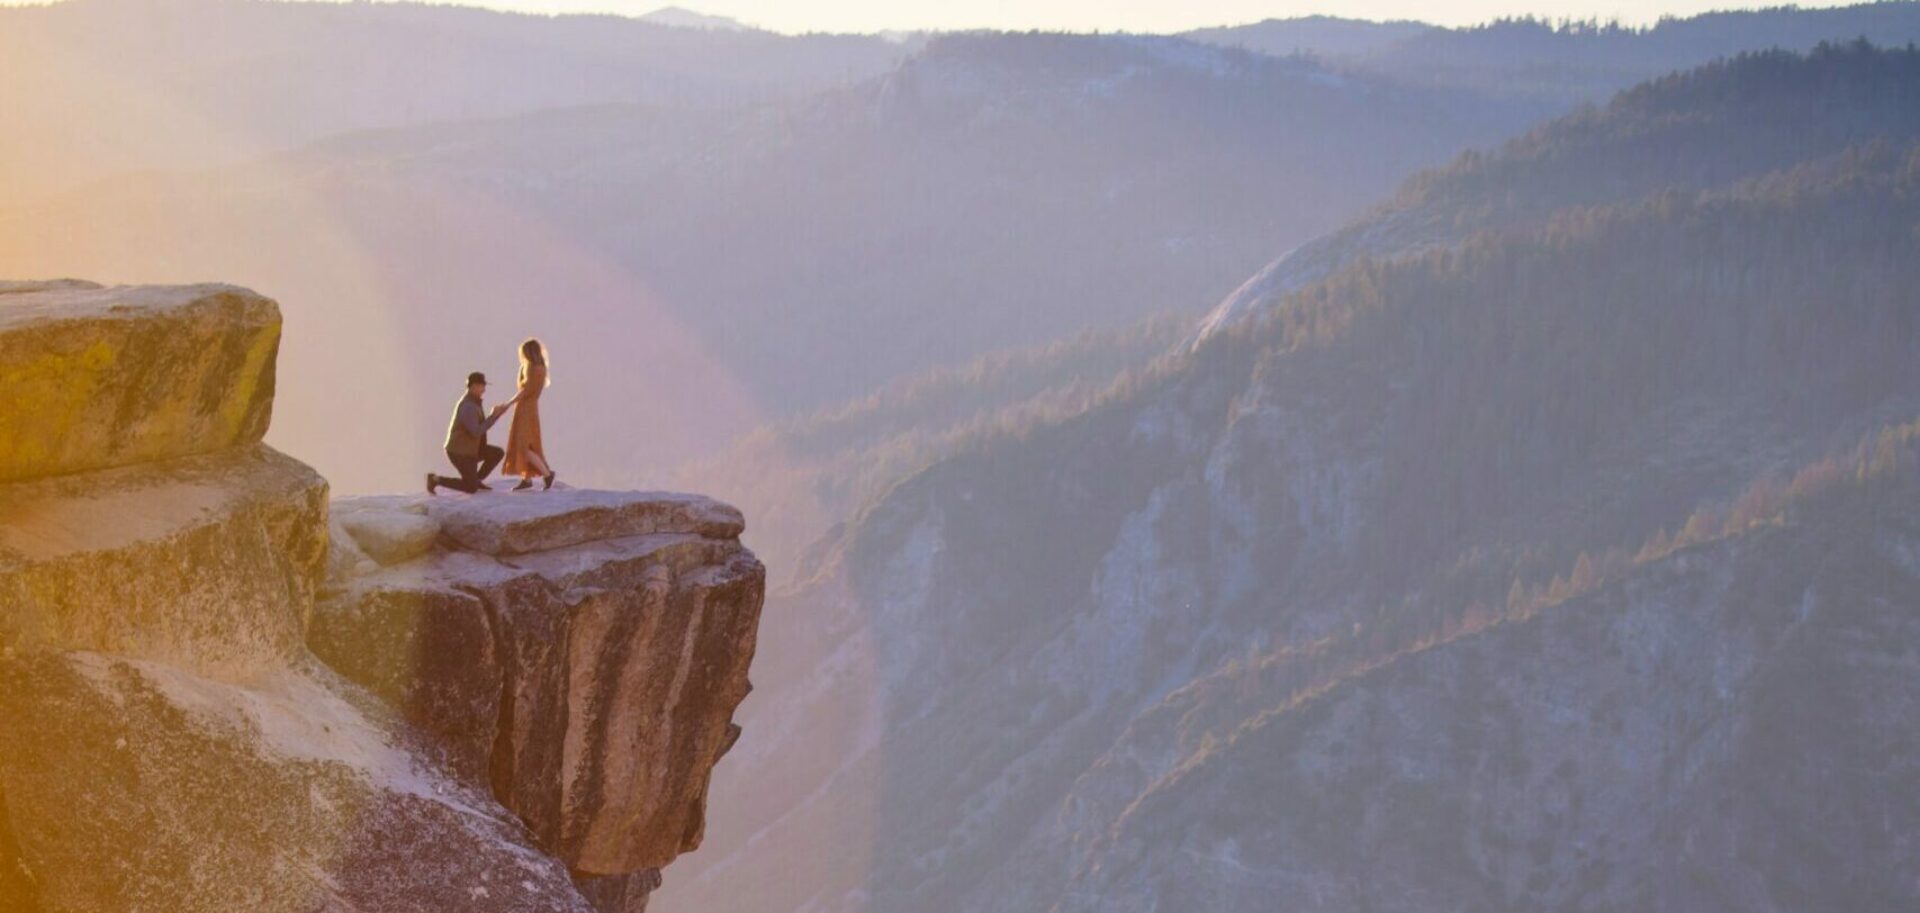 A man proposes to his partner at the mountain's edge, framed by breathtaking scenery.